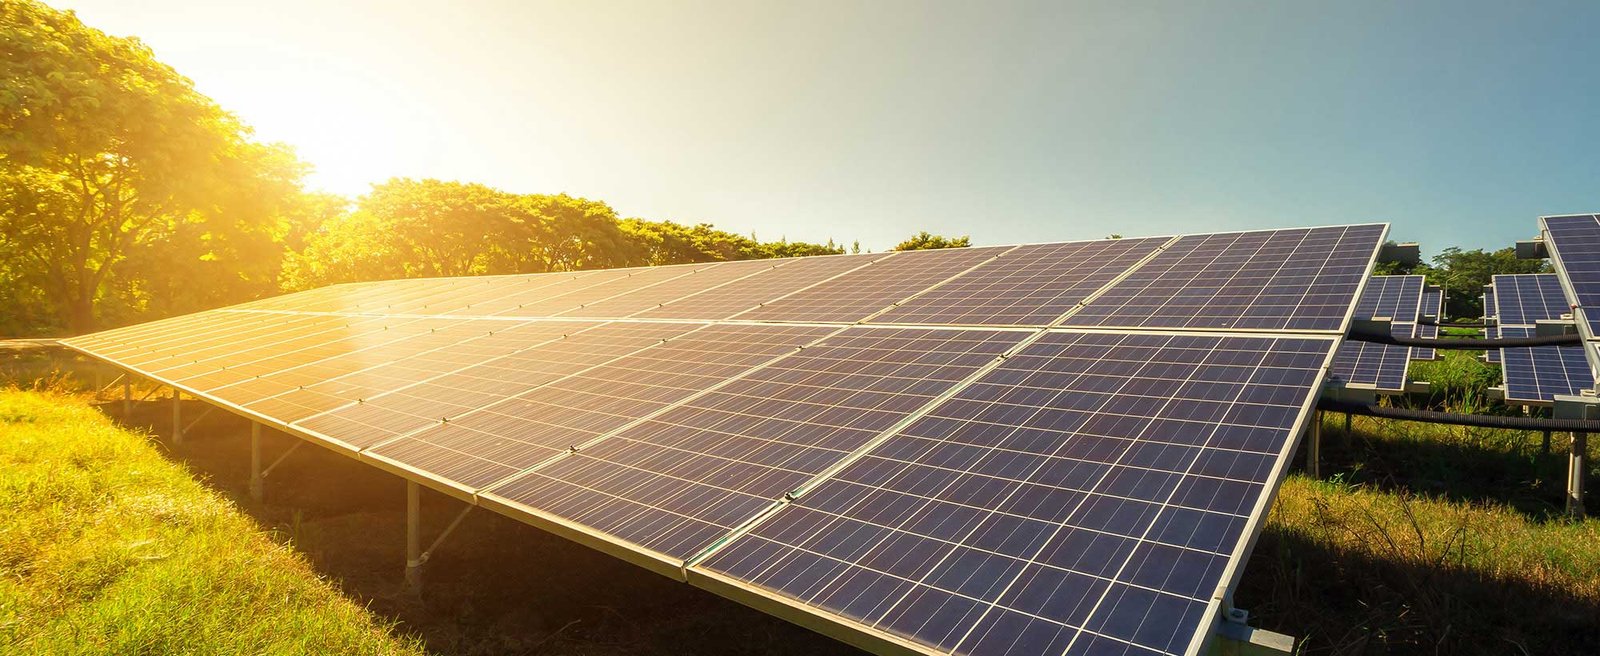 Solar Energy Is The Future. Here’s Why Your Business Should Give It A Try